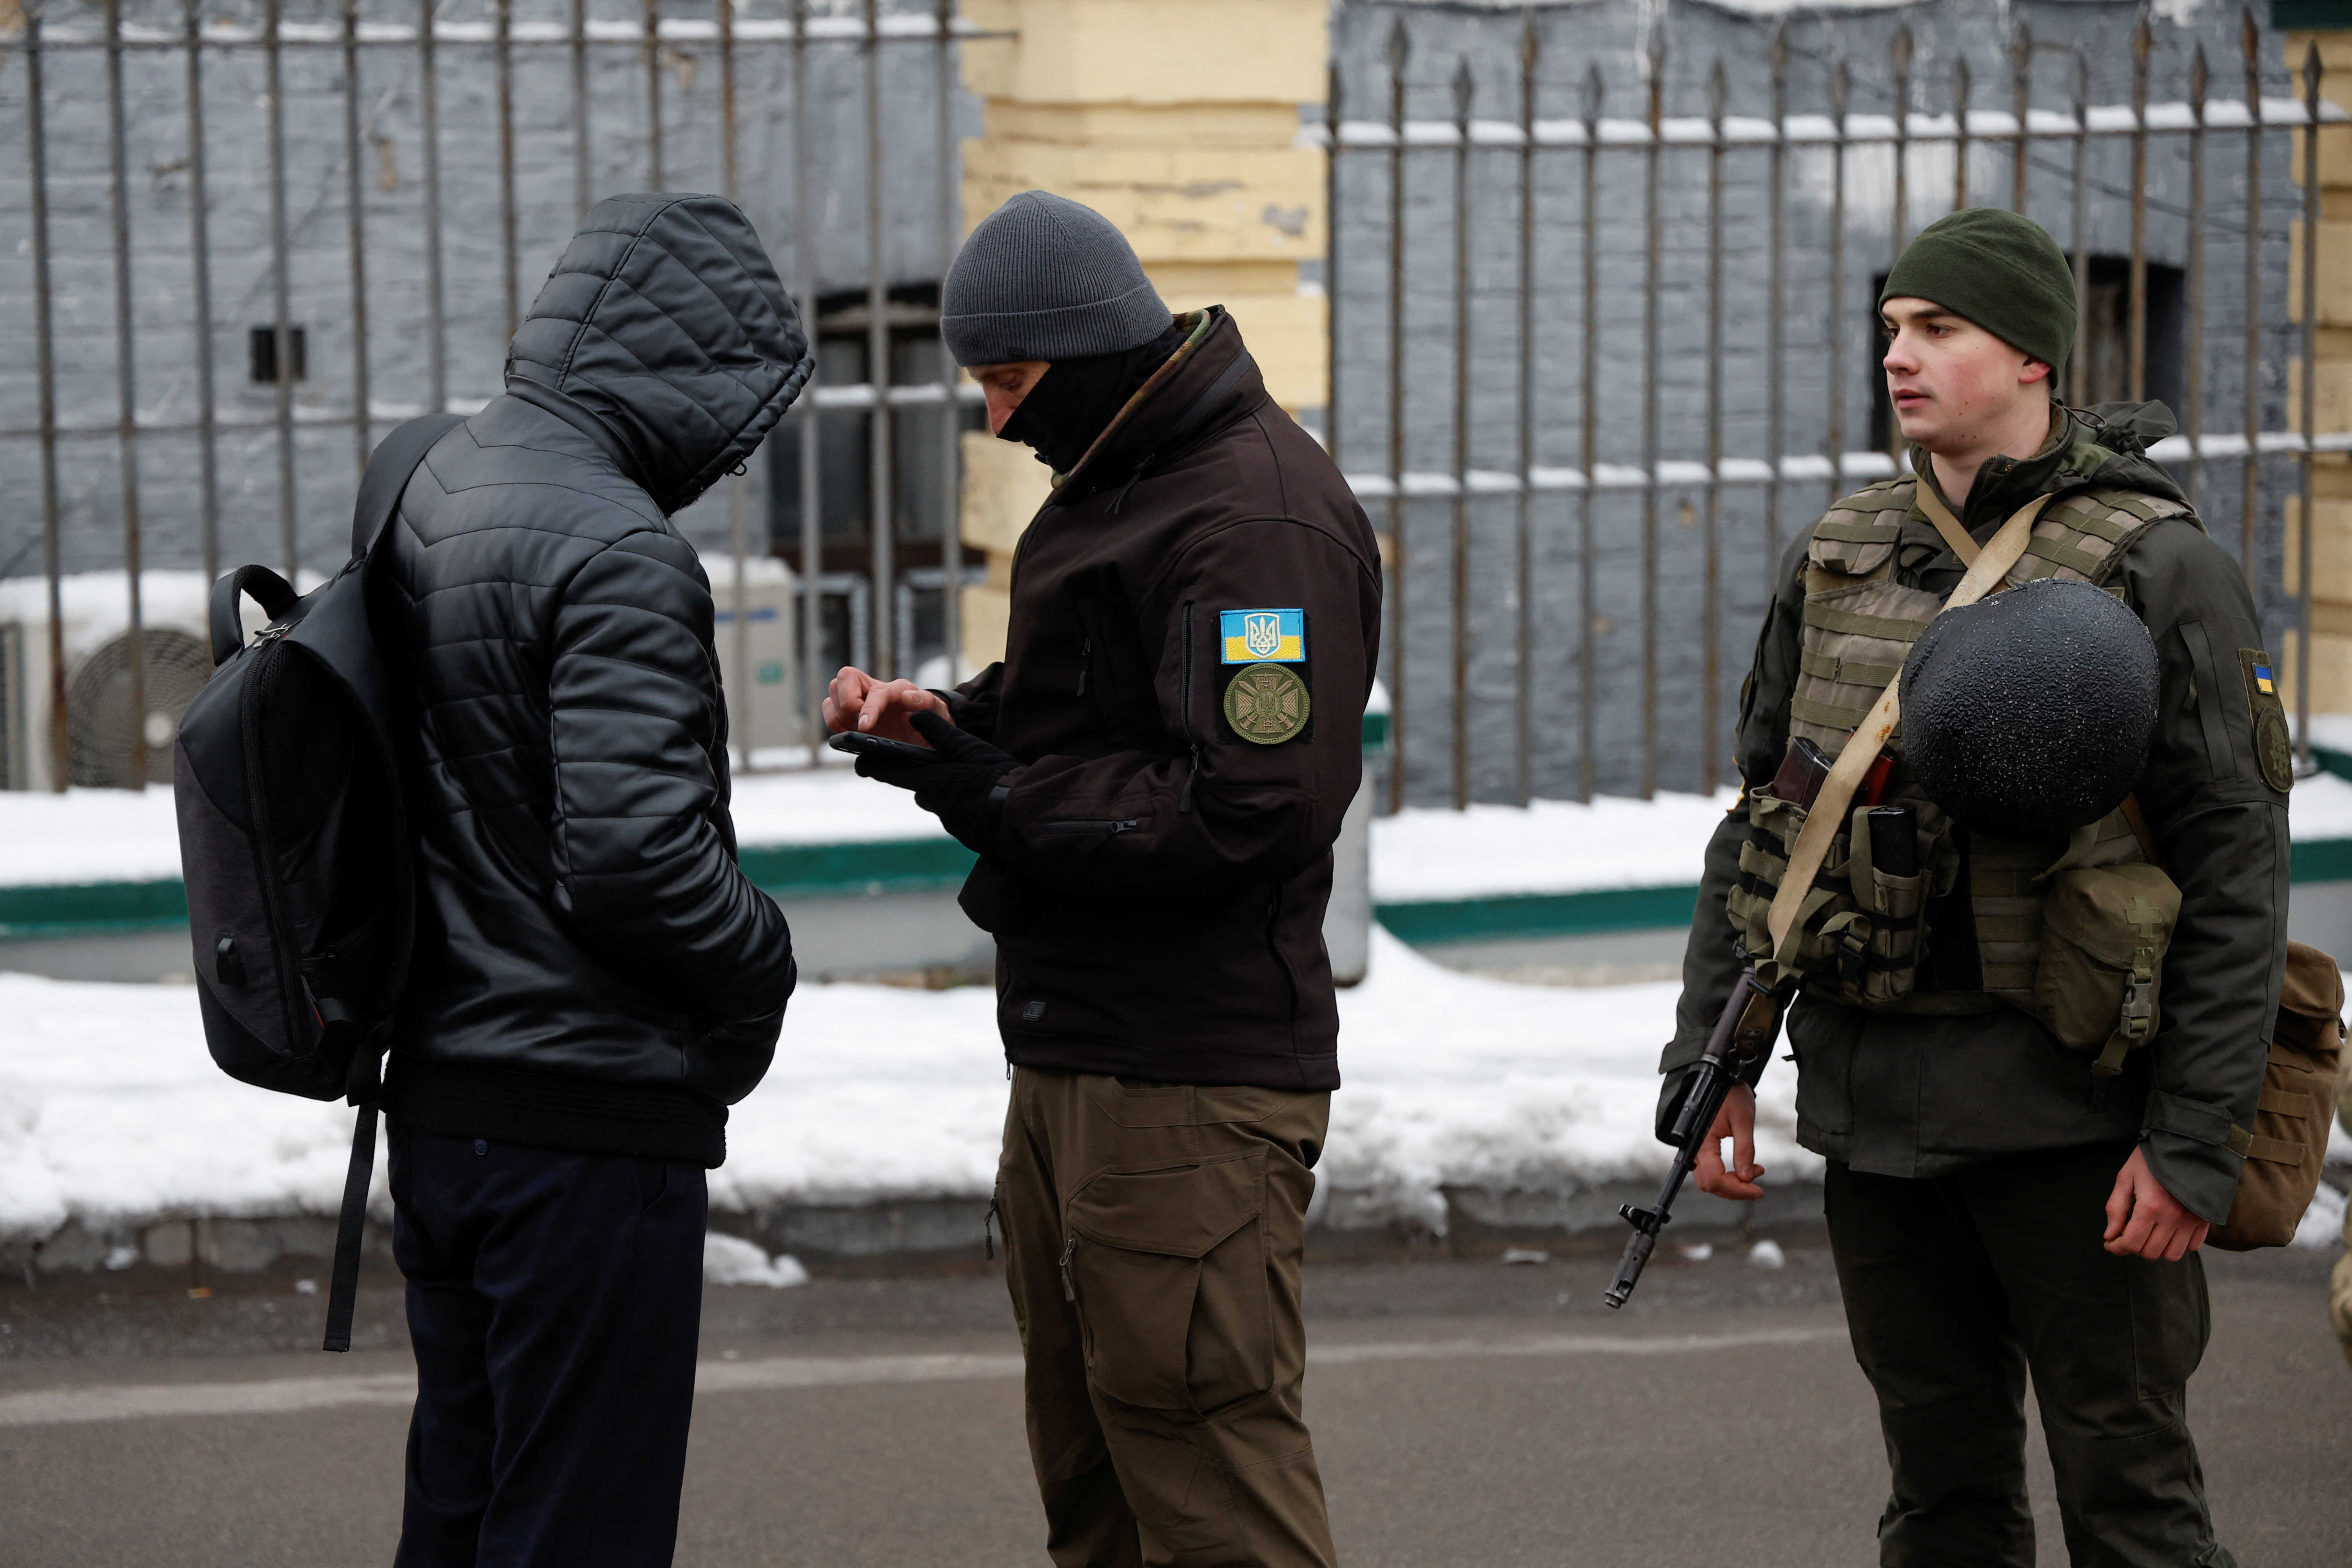 Ukrainian law enforcement officers check documents of a visitor of the Kyiv Pechersk Lavra monastery in Kyiv